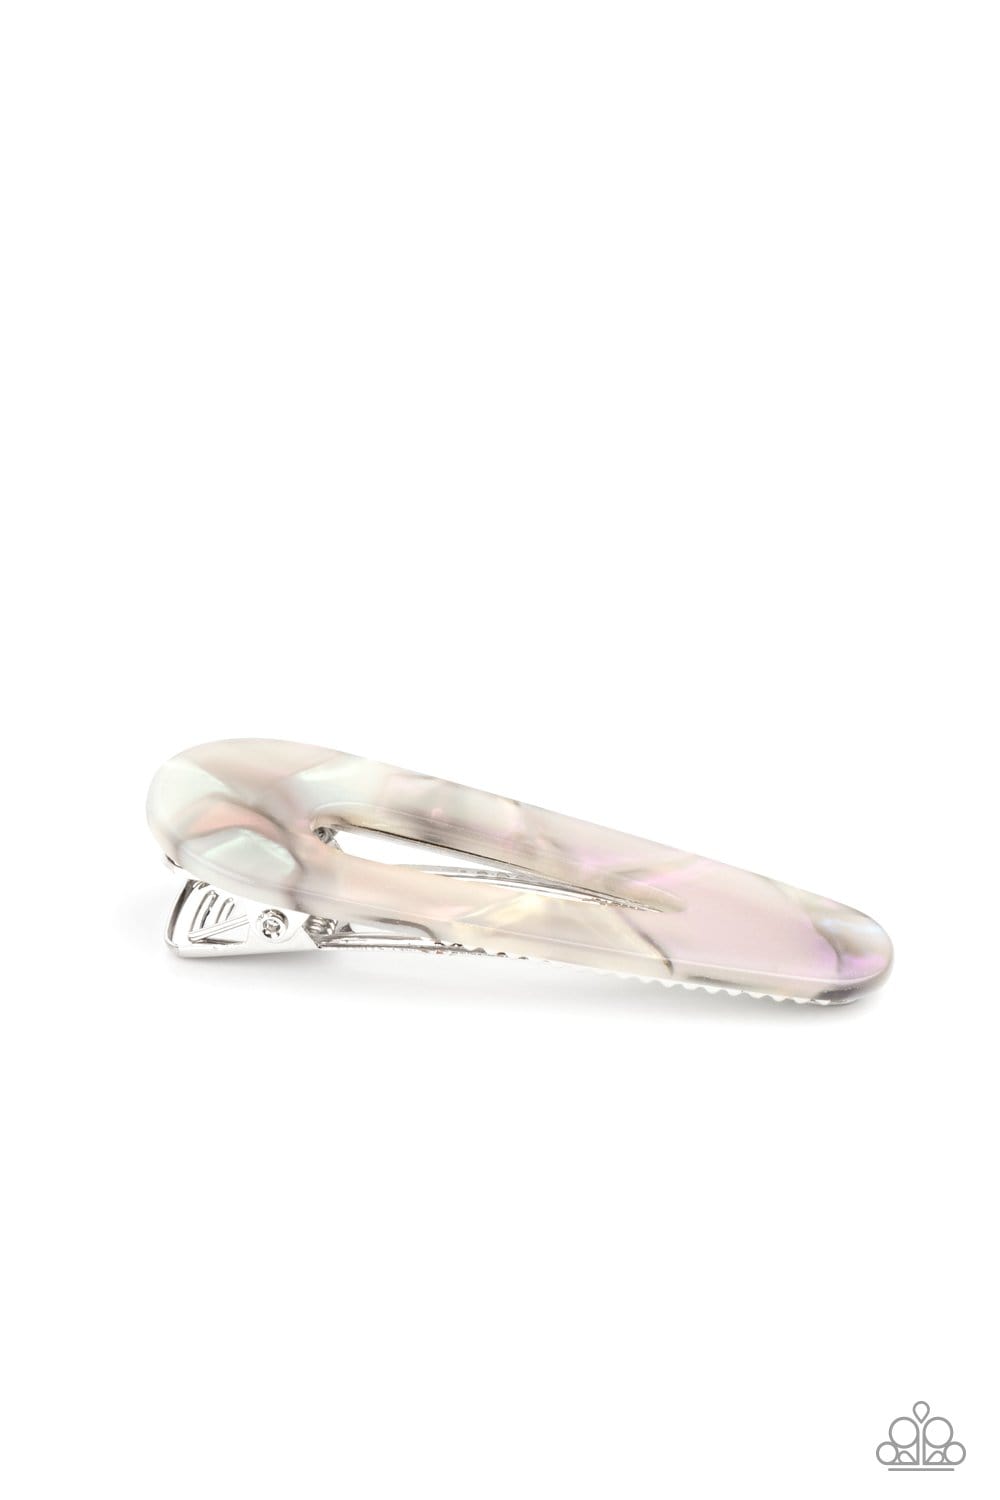 Paparazzi Accessories: Walking on HAIR - Silver Iridescent Hair Clip - Jewels N Thingz Boutique